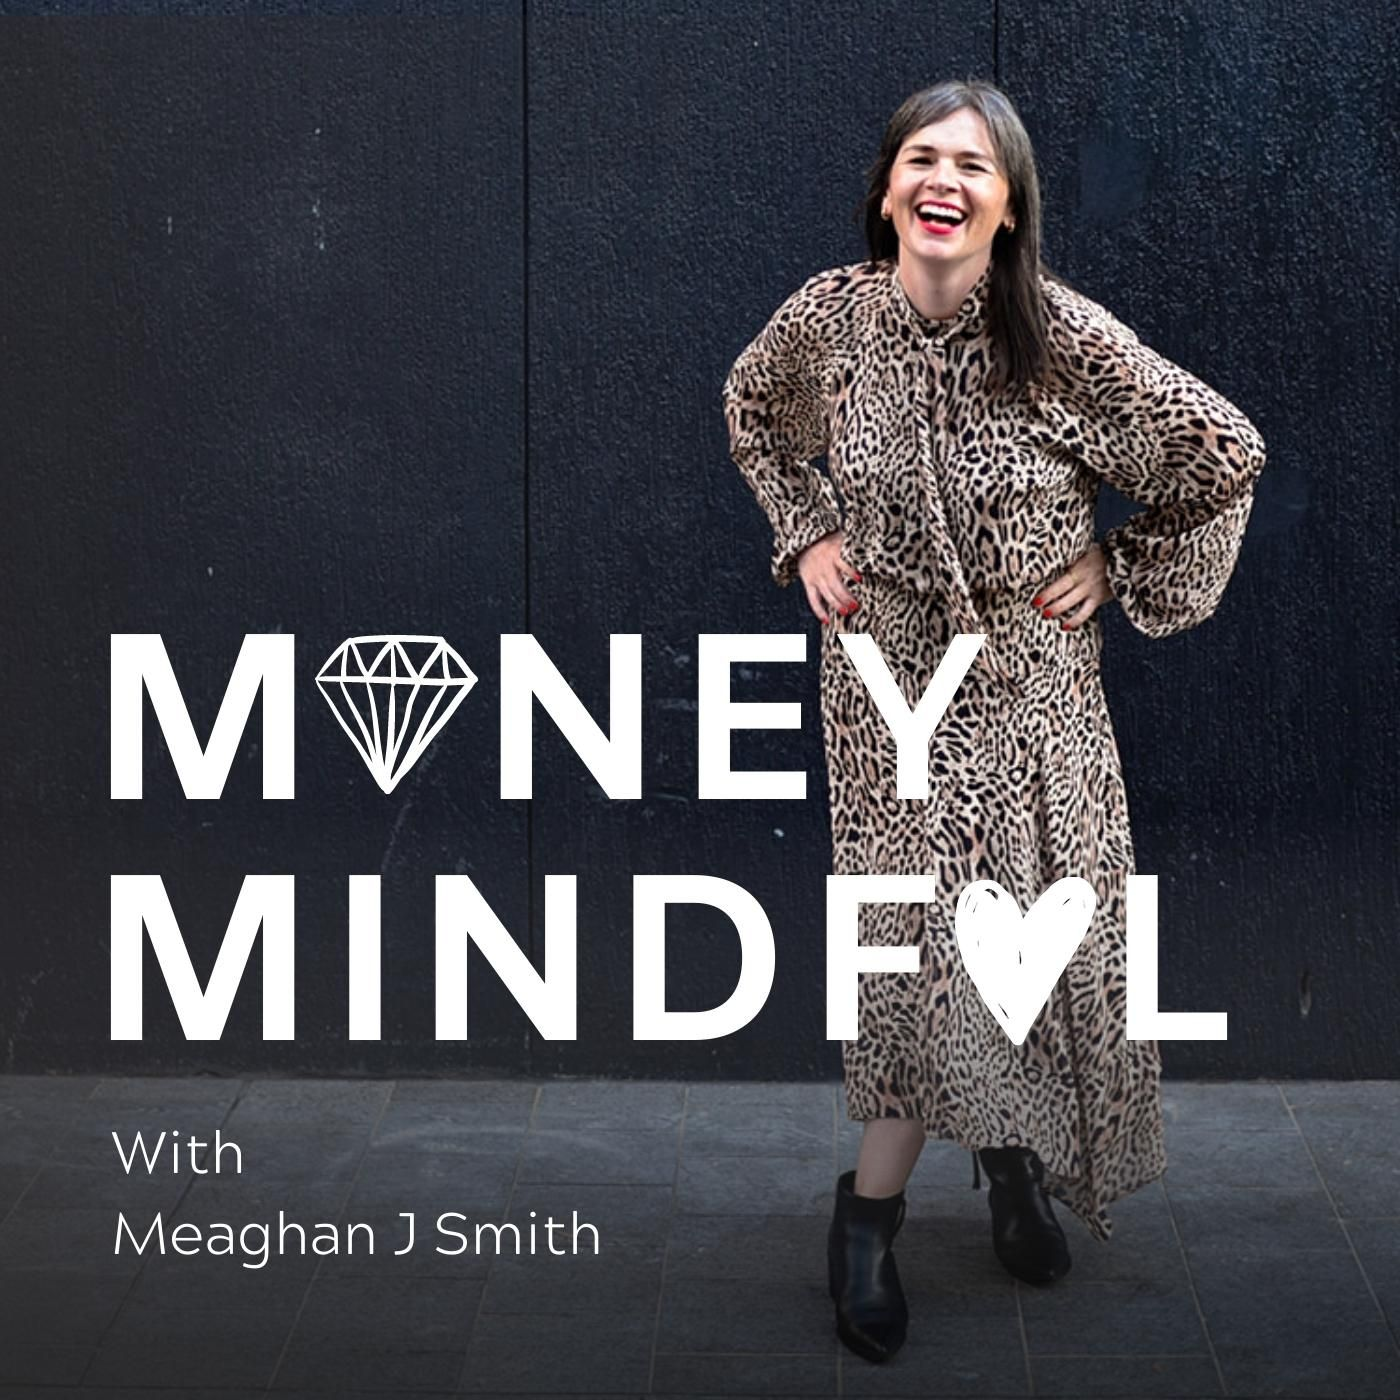 How To Make Money With Your Mind with Life Coach Kathryn Green